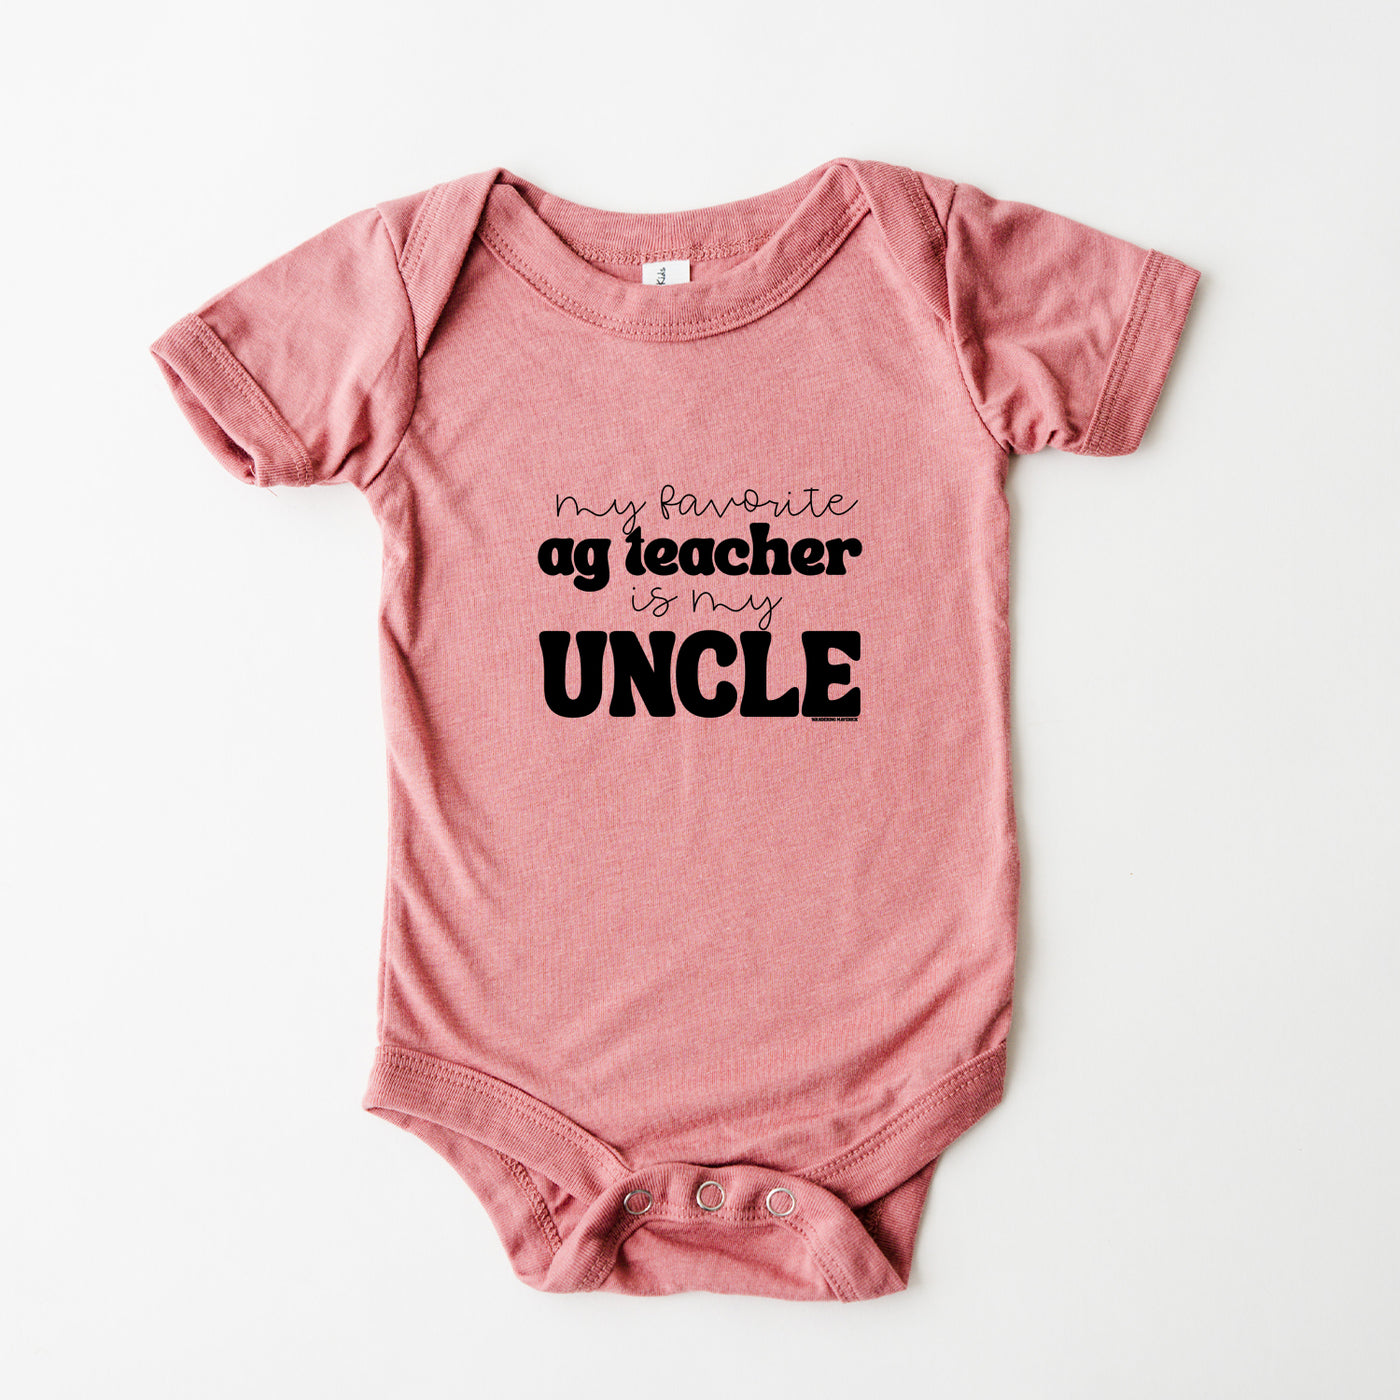 My Favorite Ag Teacher Is My Uncle One Piece/T-Shirt (Newborn - Youth XL) - Multiple Colors!